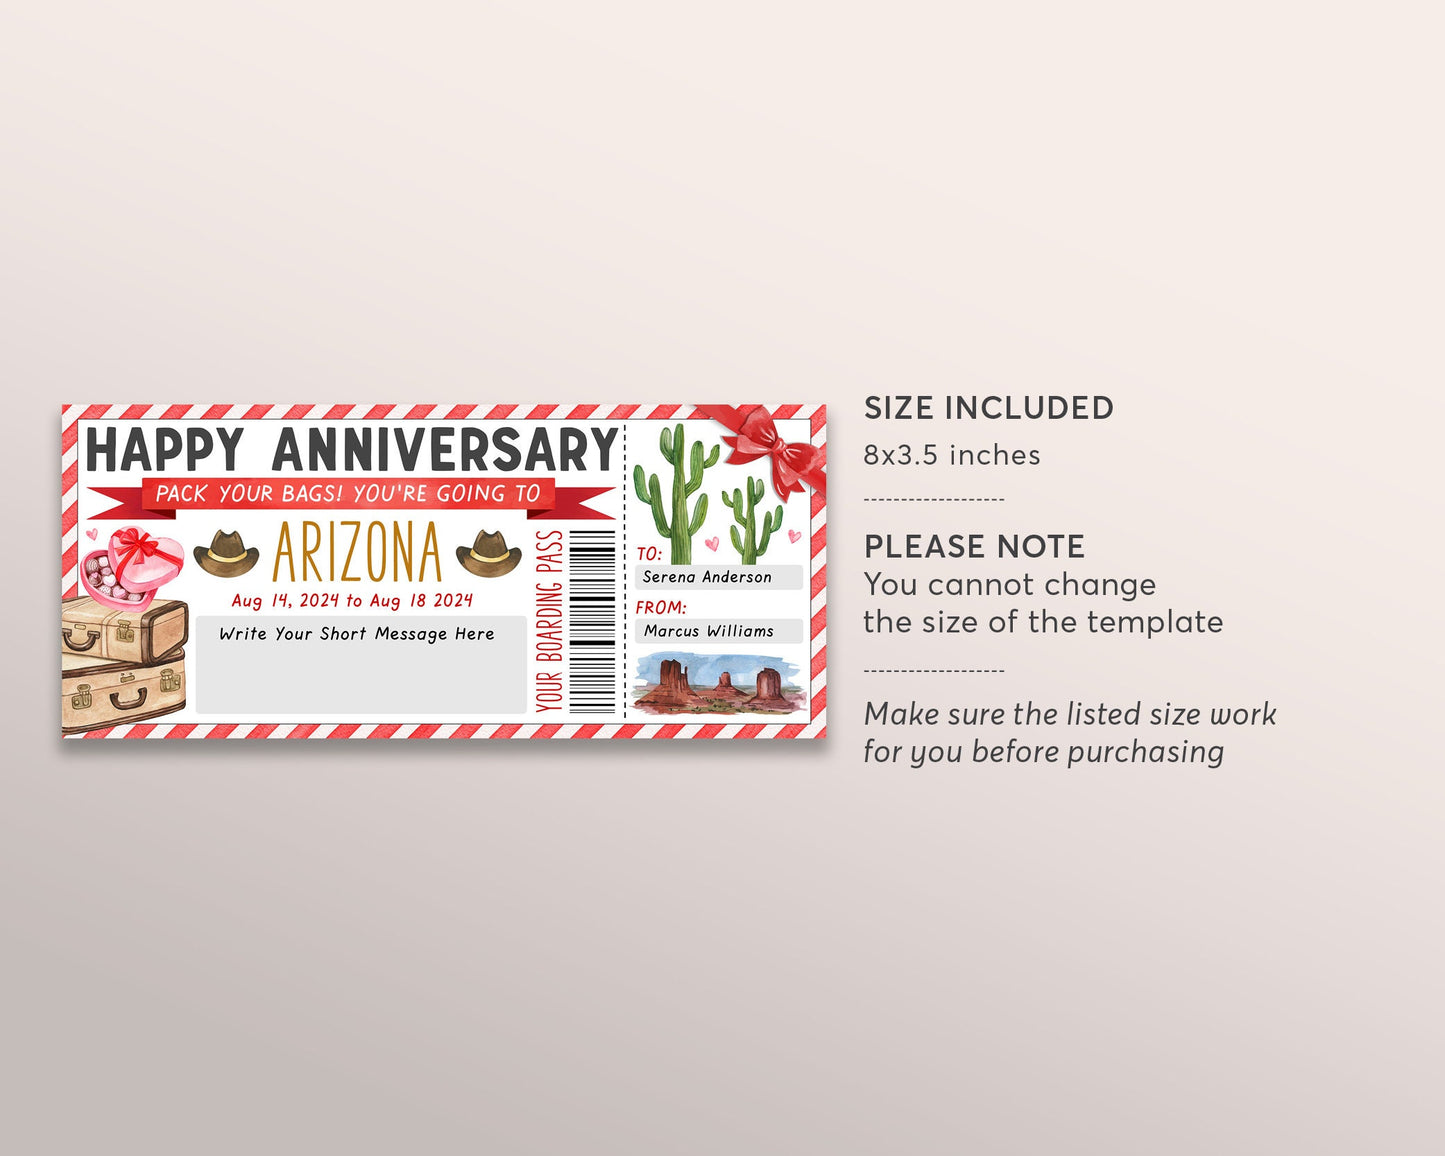 Wedding Anniversary Arizona Trip Ticket Boarding Pass Editable Template, Surprise Valentines Day Travel Airline Gift Certificate Trip Reveal